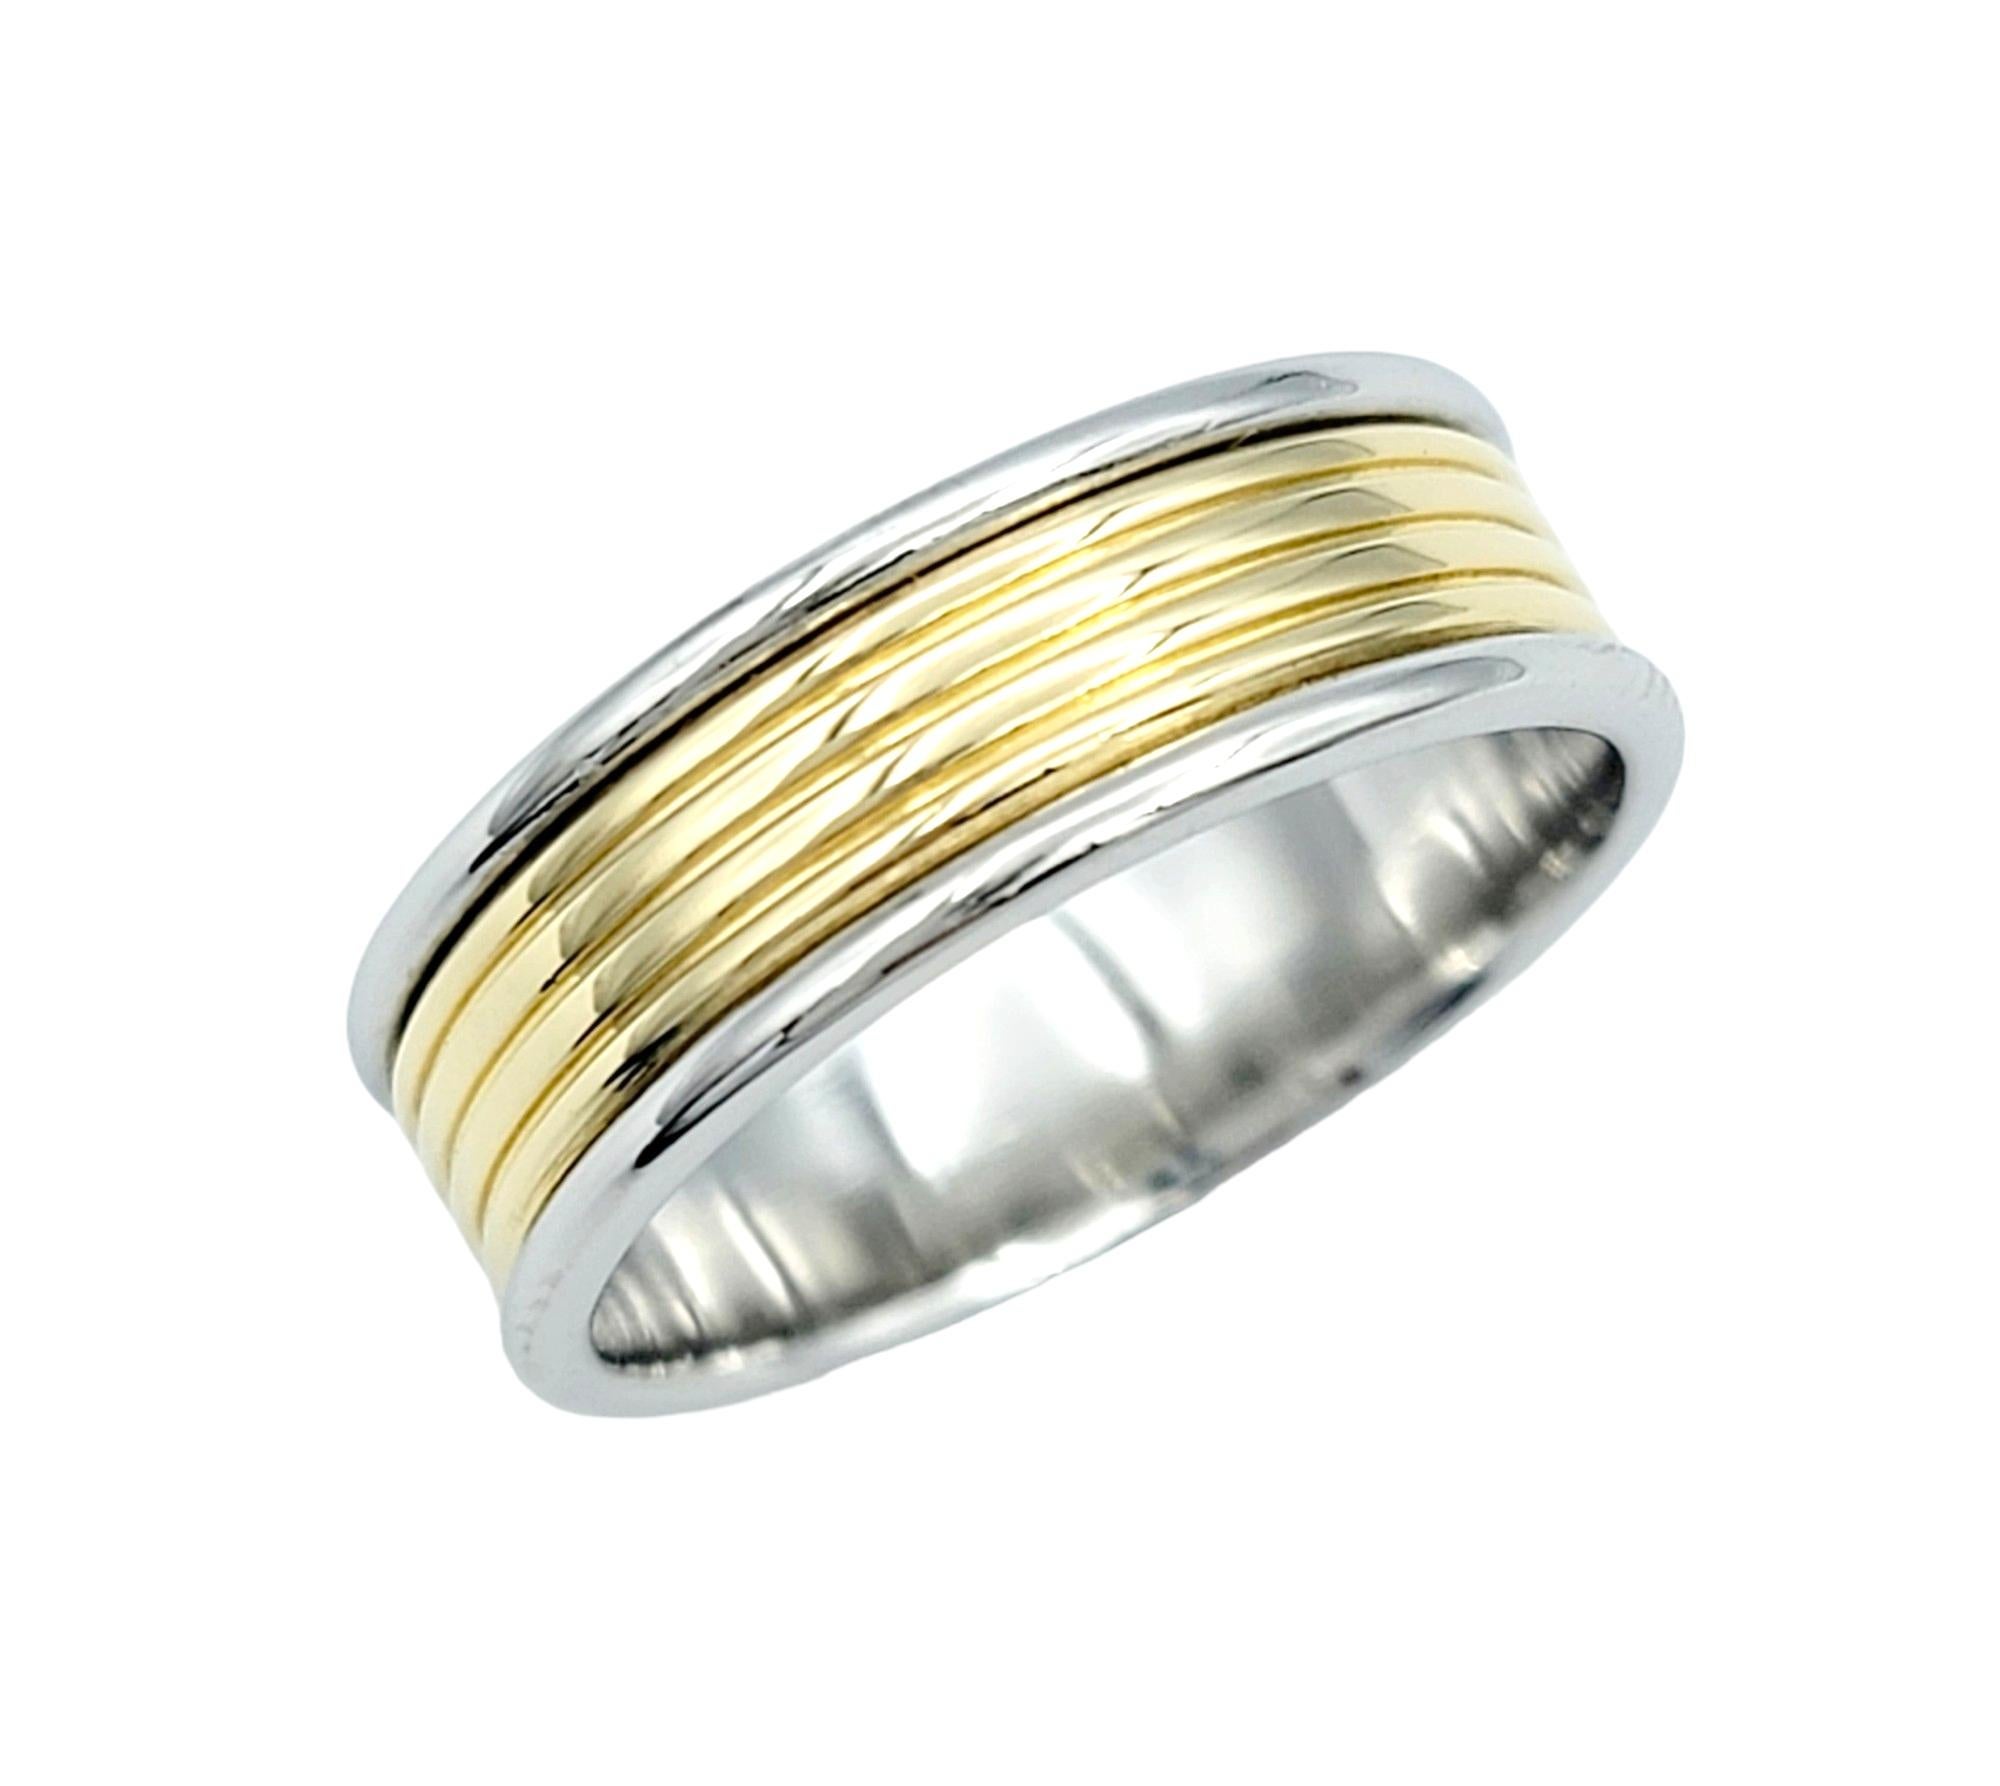 Ring Size: 5.5

This elegant Tiffany & Co. band ring is a masterful combination of platinum and 18 karat yellow gold, creating a timeless and sophisticated piece. The outer edges of the ring crafted in platinum provide durability and a sleek